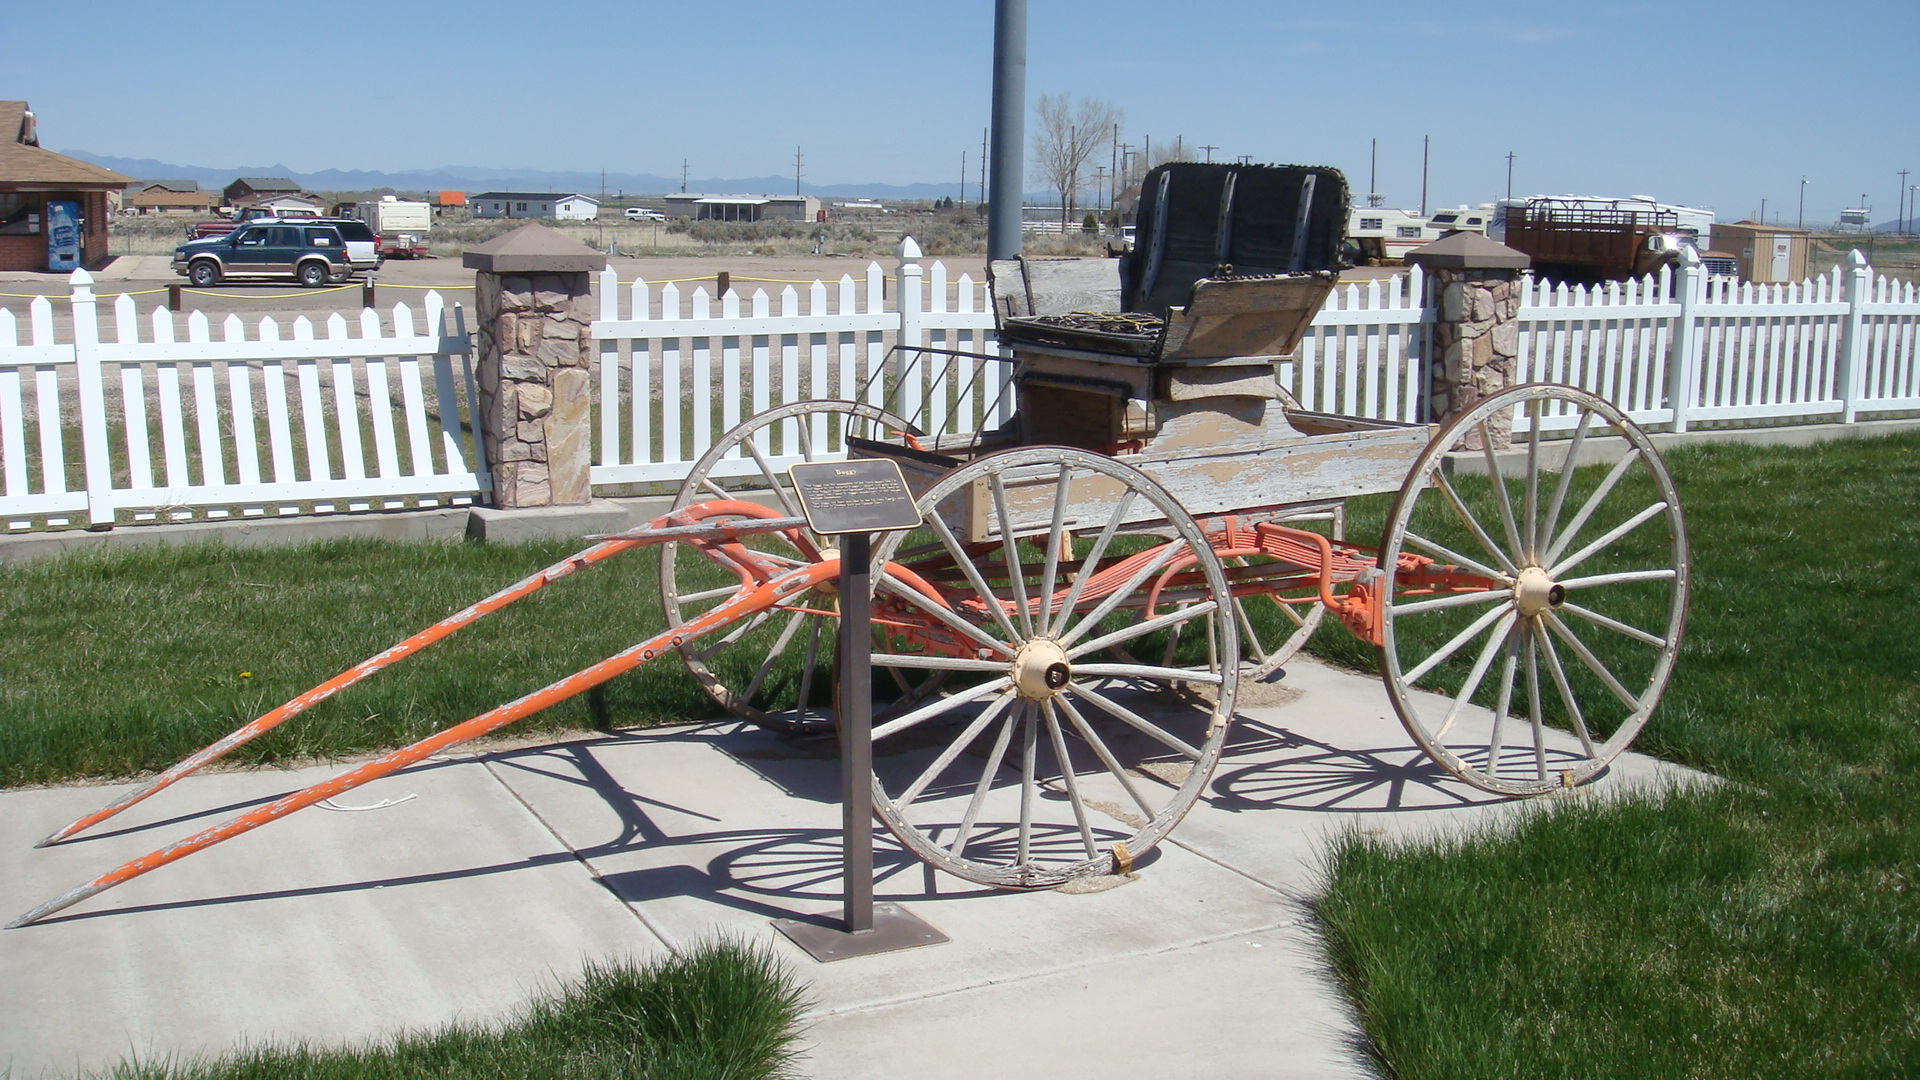 A buggy on display at the Terry Family Heritage Park